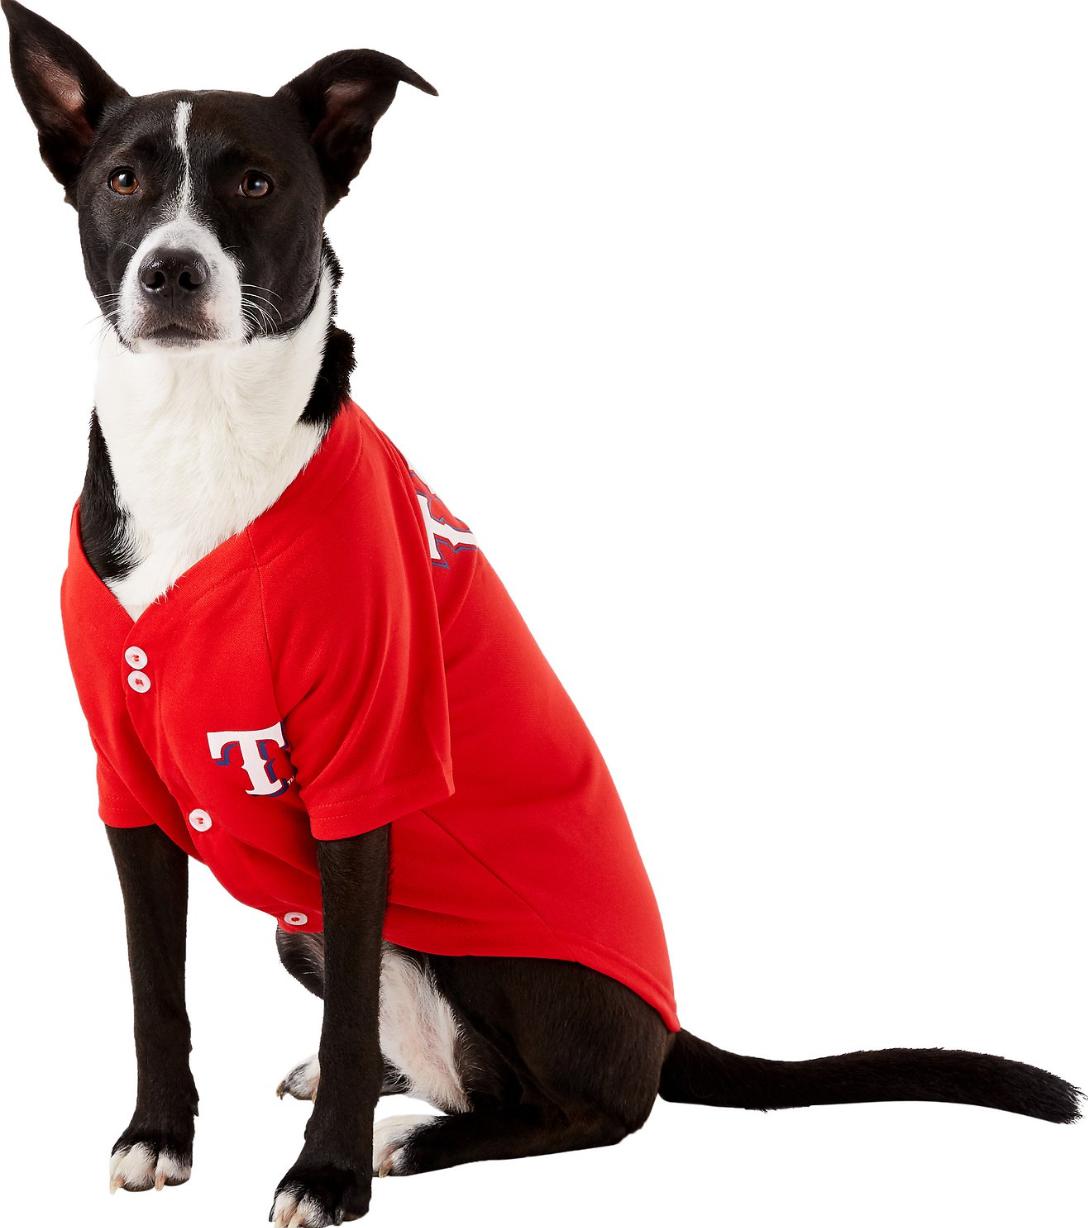 Pets First MLB Texas Rangers Camouflage Jersey For Dogs, Pet Shirt For  Hunting, Hosting a Party, or Showing off your Sports Team, Large 